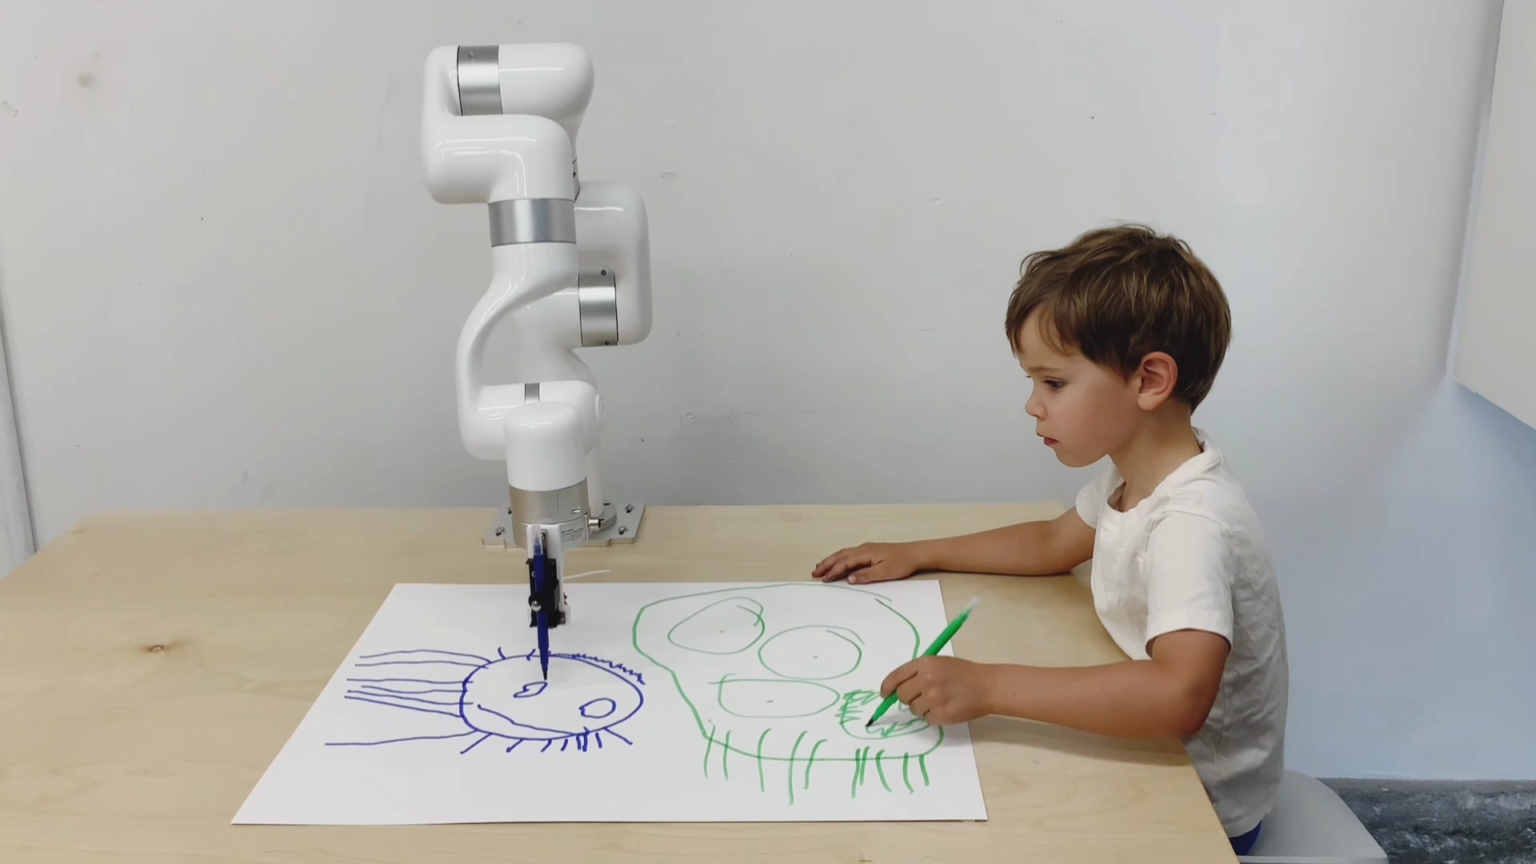 Child interacting with robot